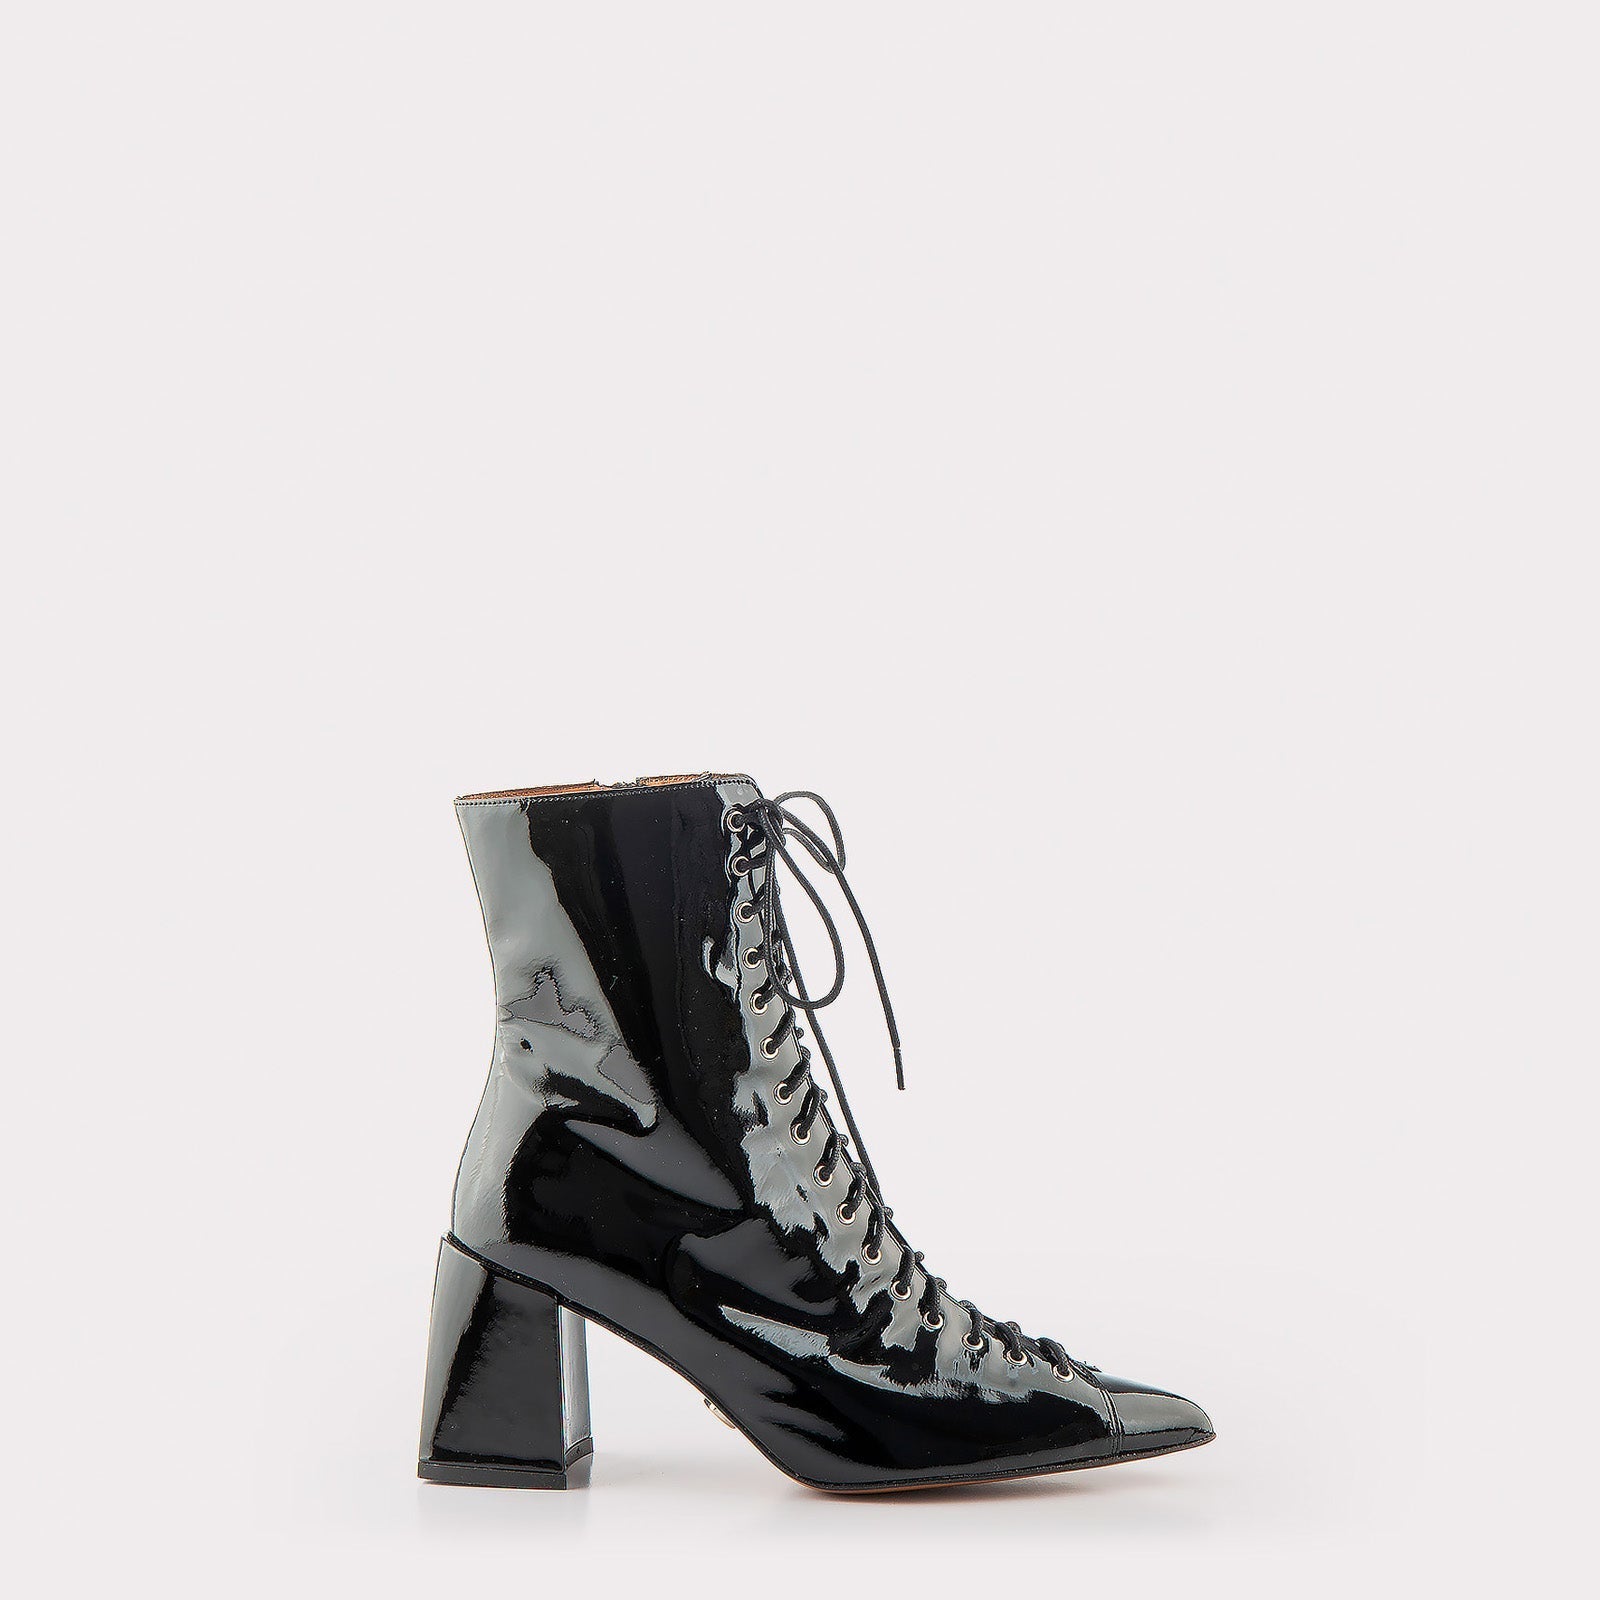 JOLIE 01 BLACK PATENT LEATHER ANKLE BOOTS